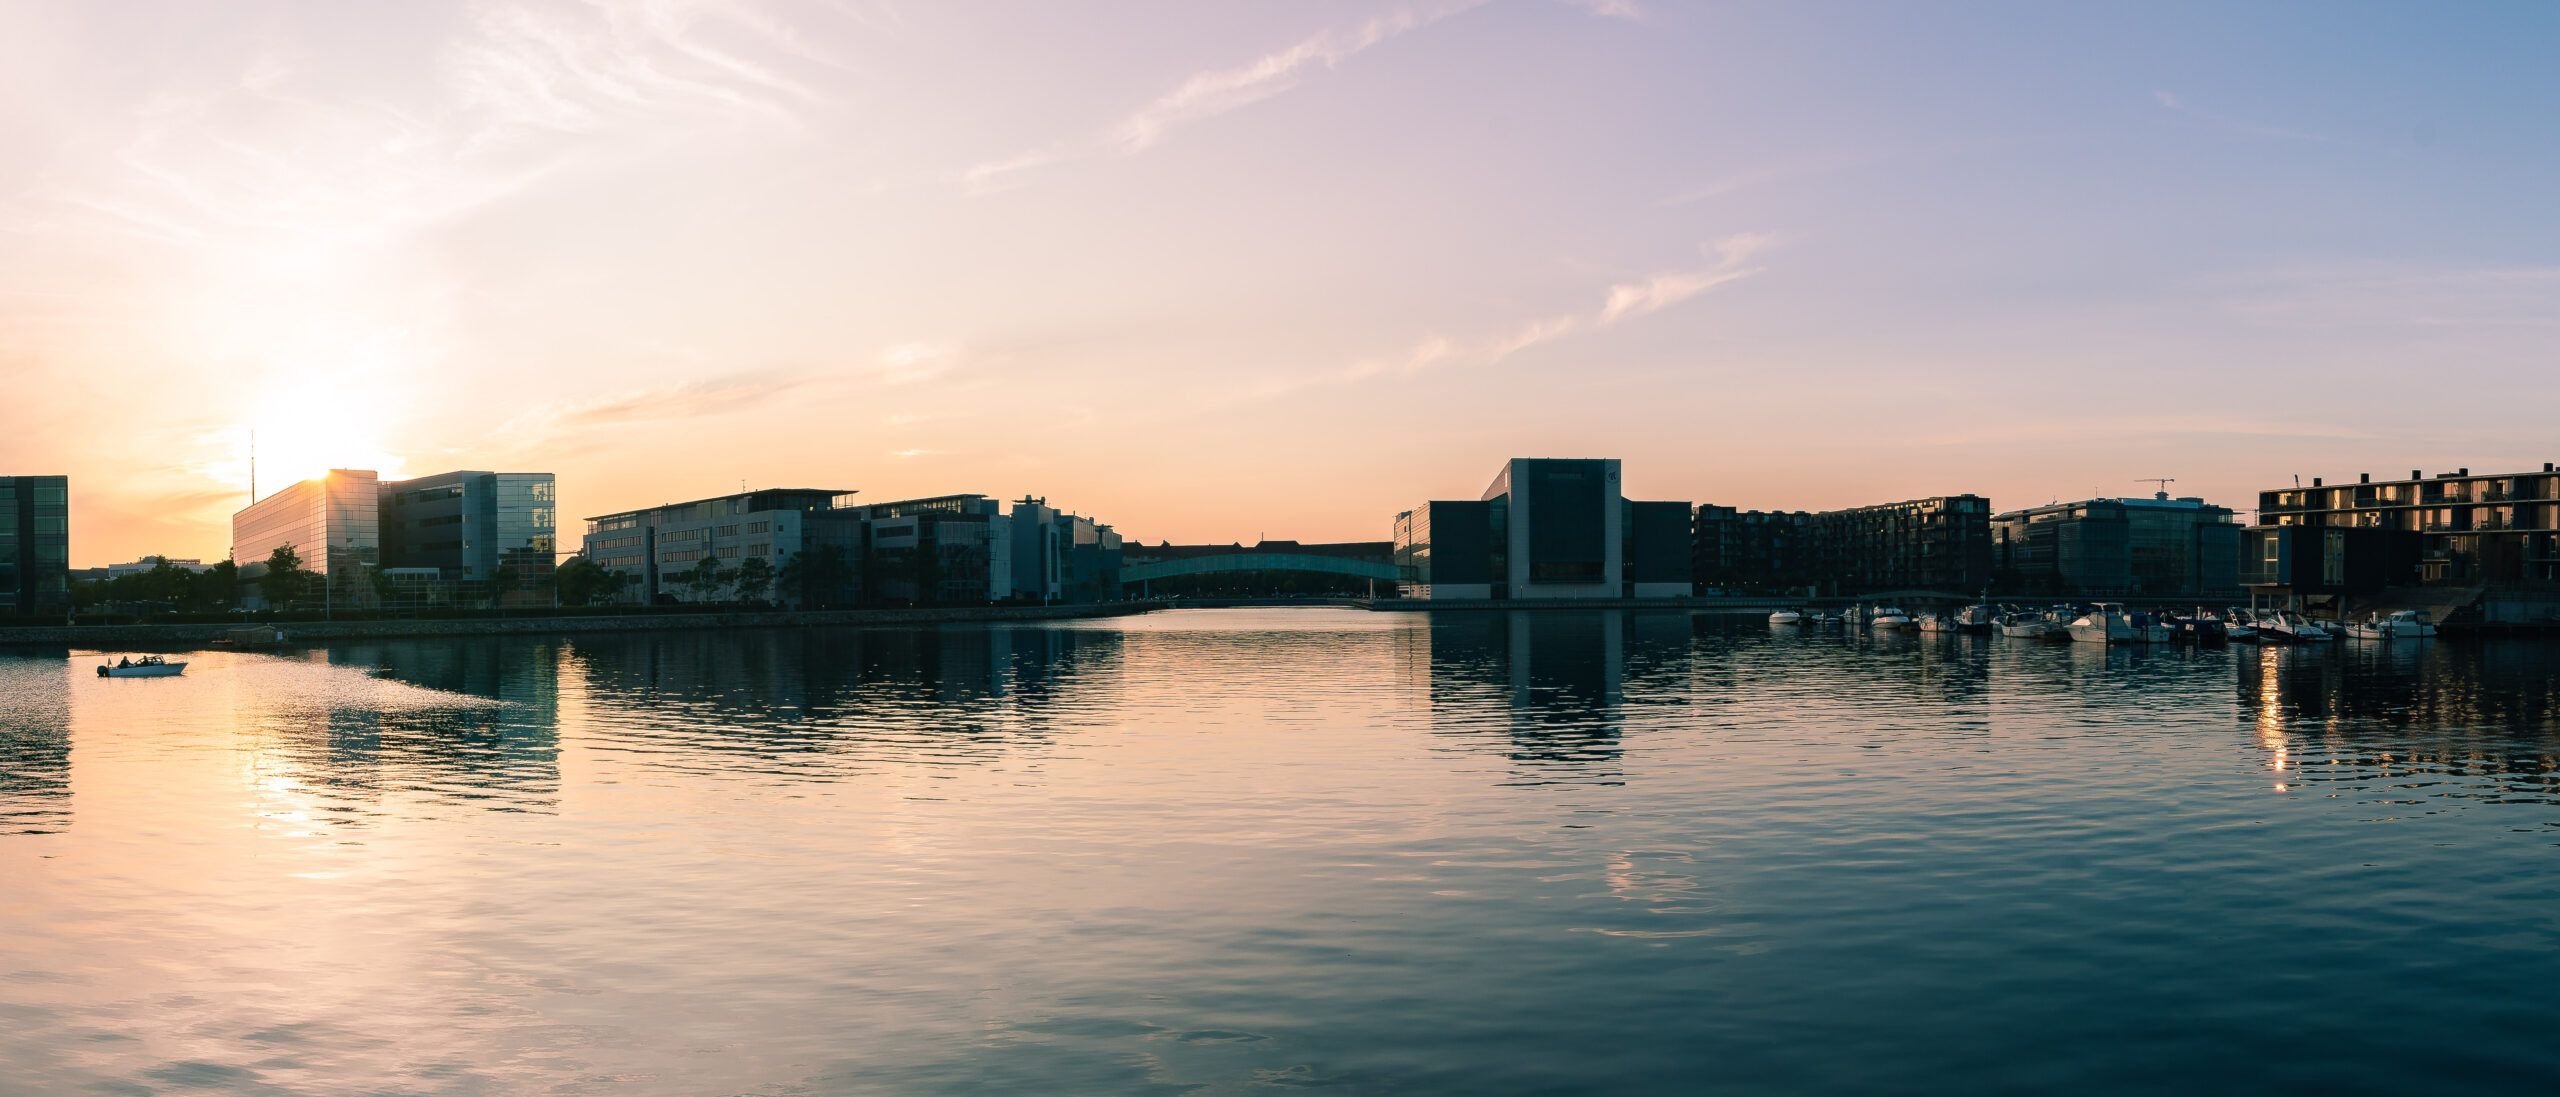 Aalborg University view from the water